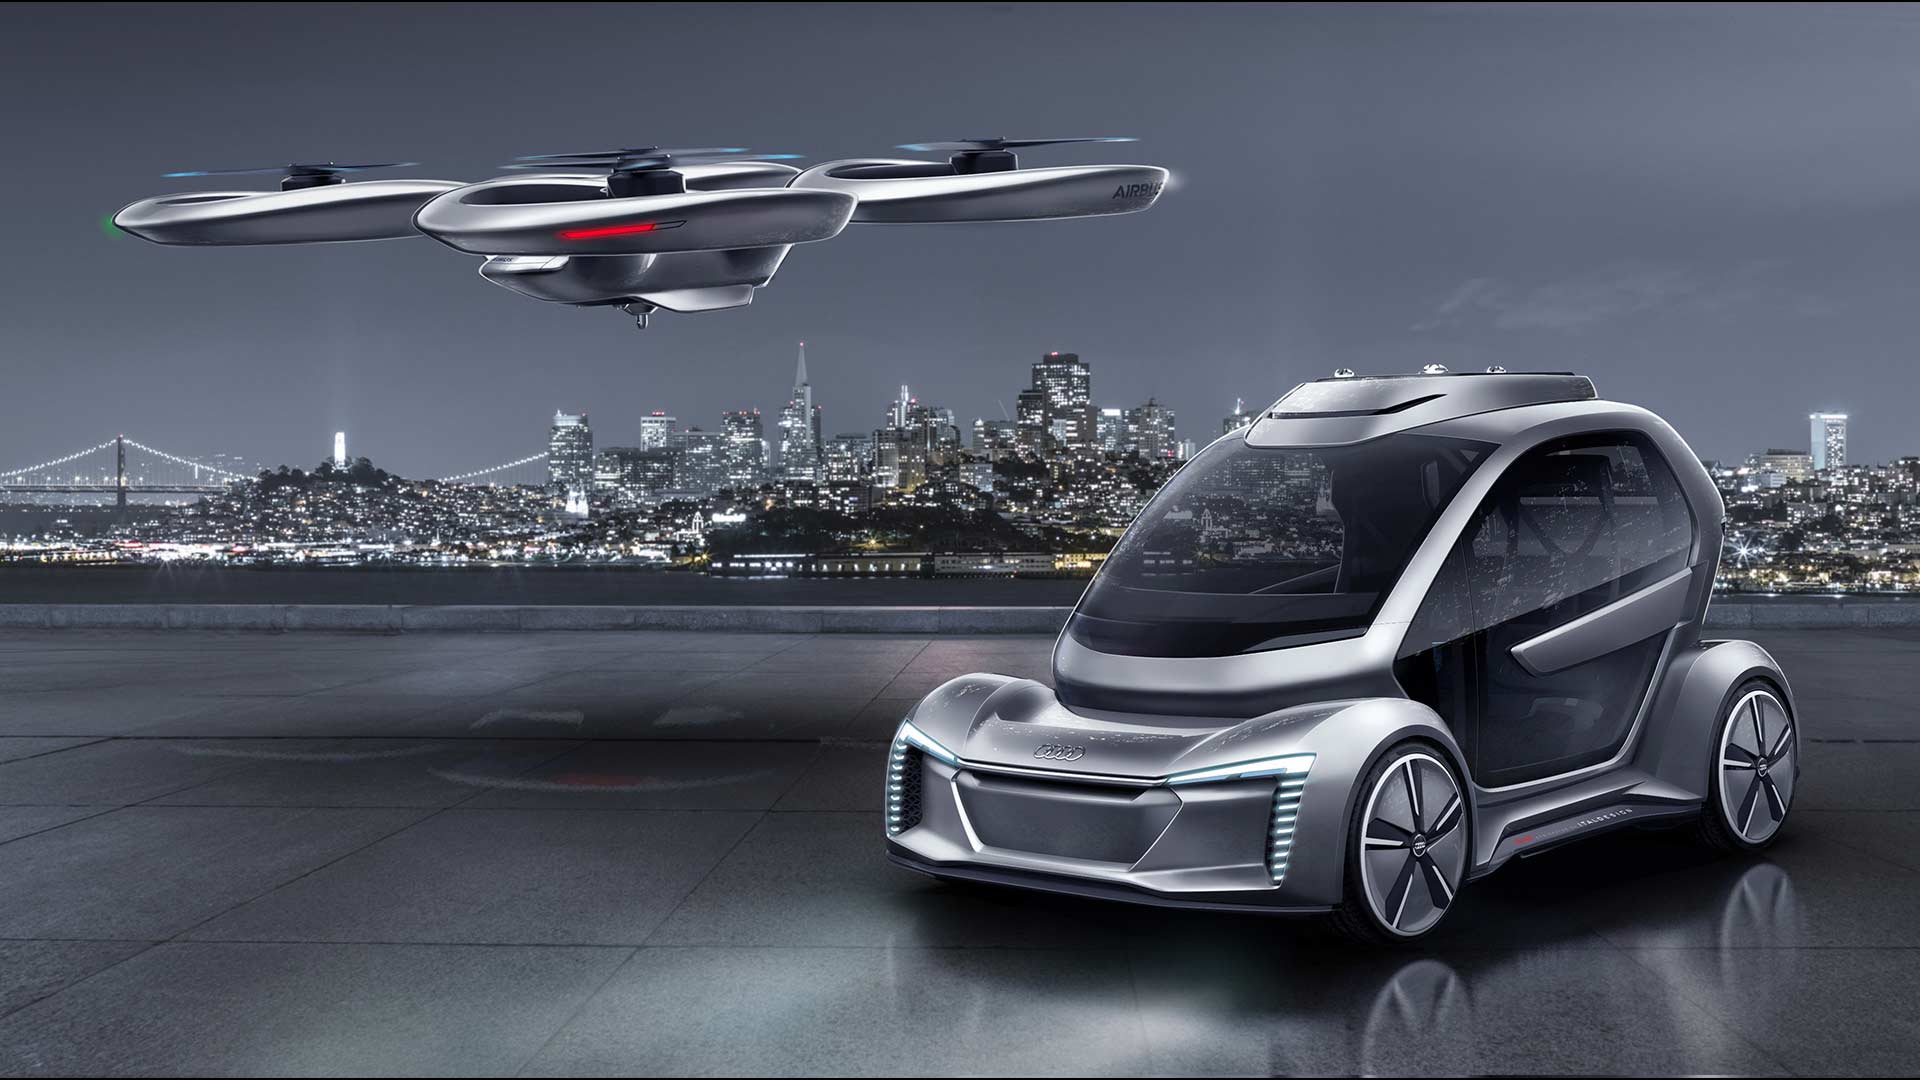 Audi-air-taxi-project-Ingolstadt